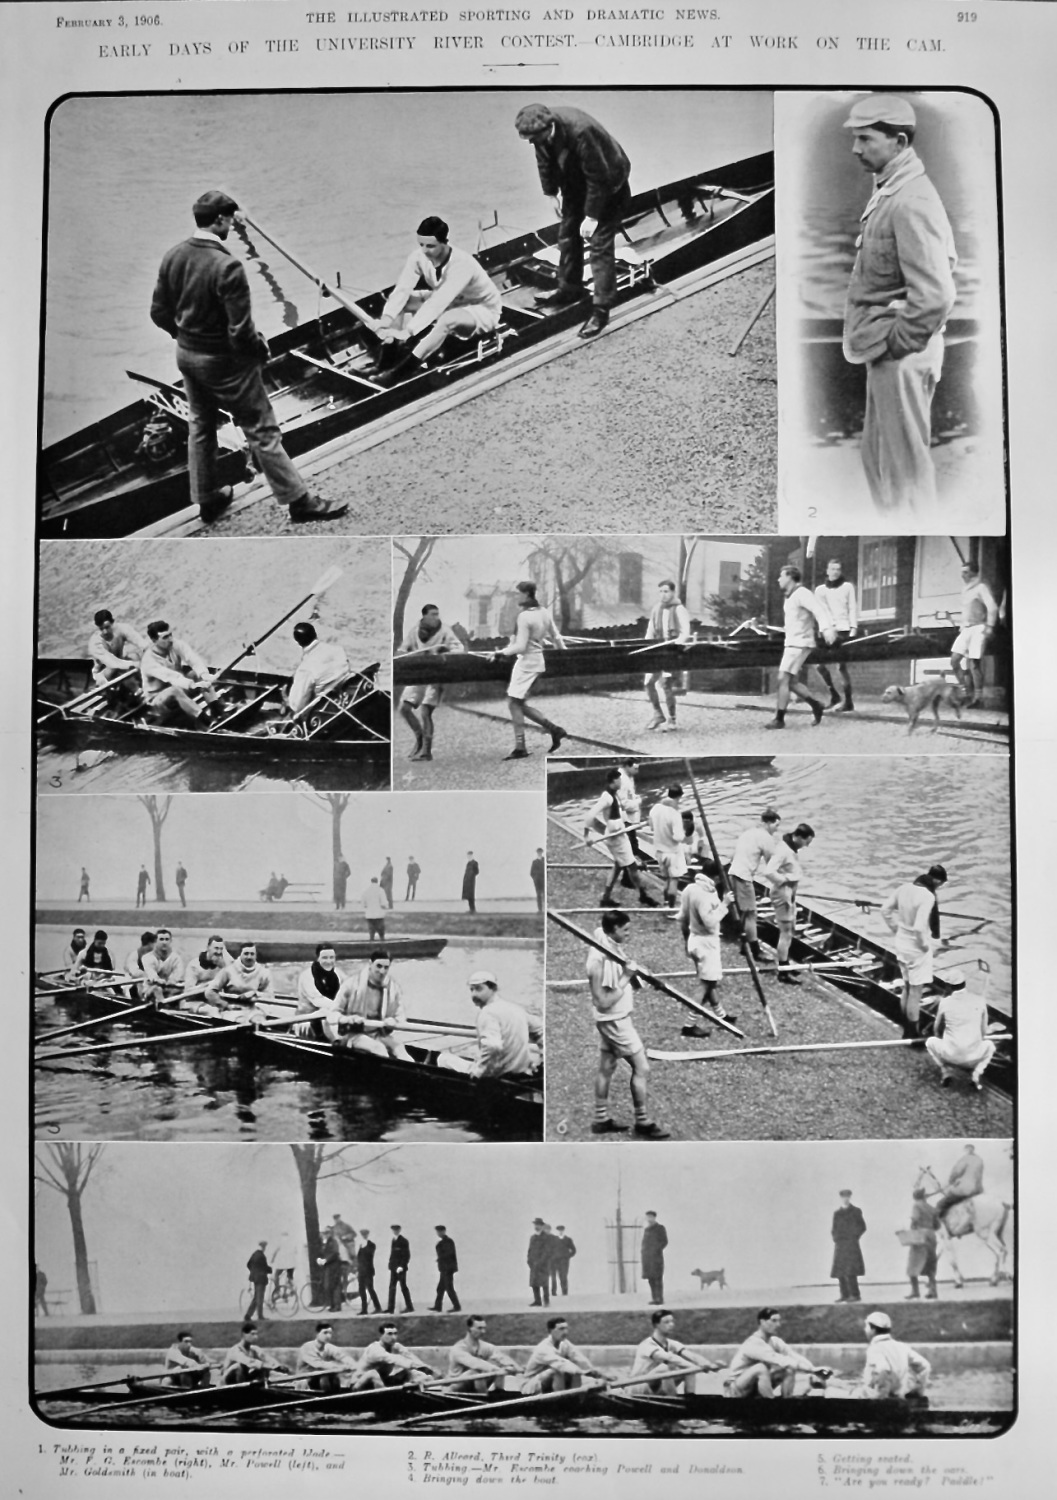 Early Days of the University River Contest.- Cambridge at Work on the Cam. 